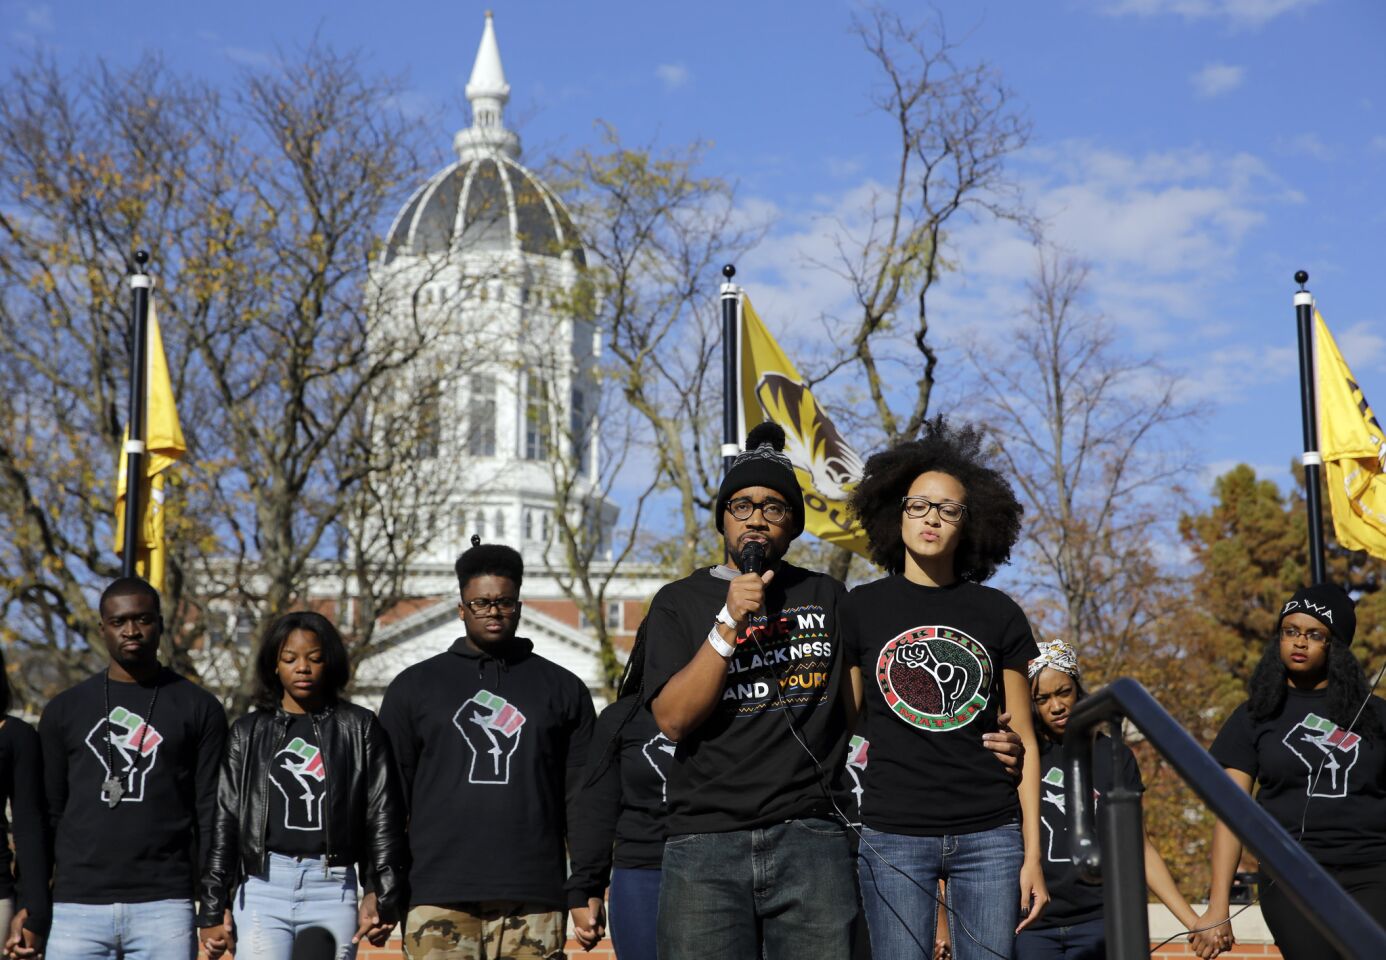 Jonathan Butler, a graduate student who was on a hunger strike calling for the university president's removal, addresses a crowd following the announcement that University of Missouri System President Tim Wolfe would resign. Butler has ended his hunger strike.